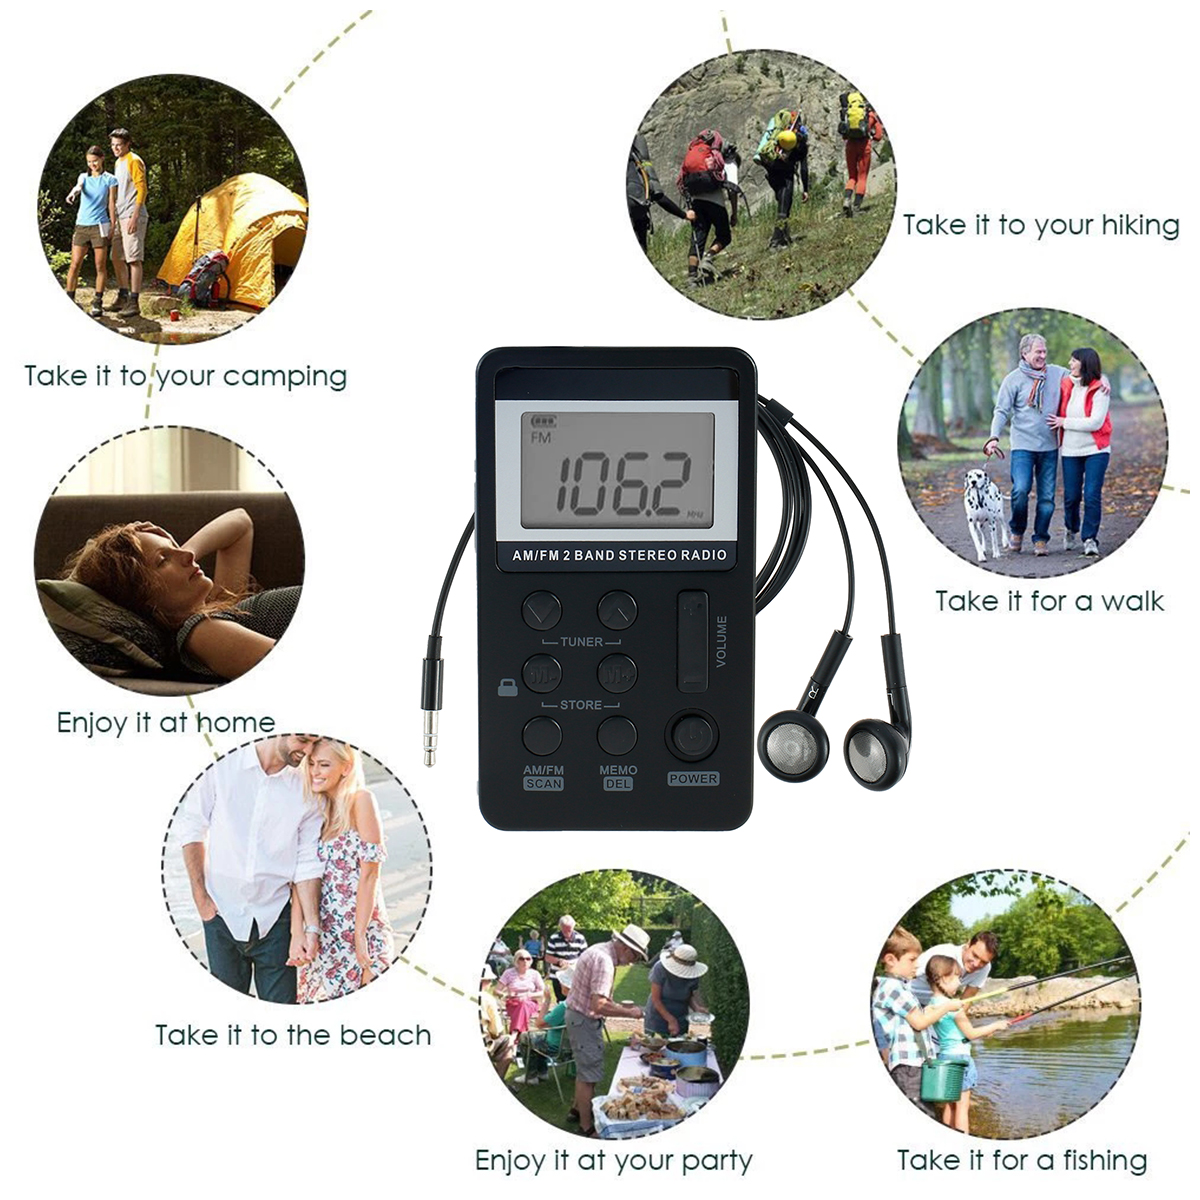 Portable AM/FM Radio, Black, Rechargeable Walkman Radio with LCD Display for Jogging - image 3 of 9